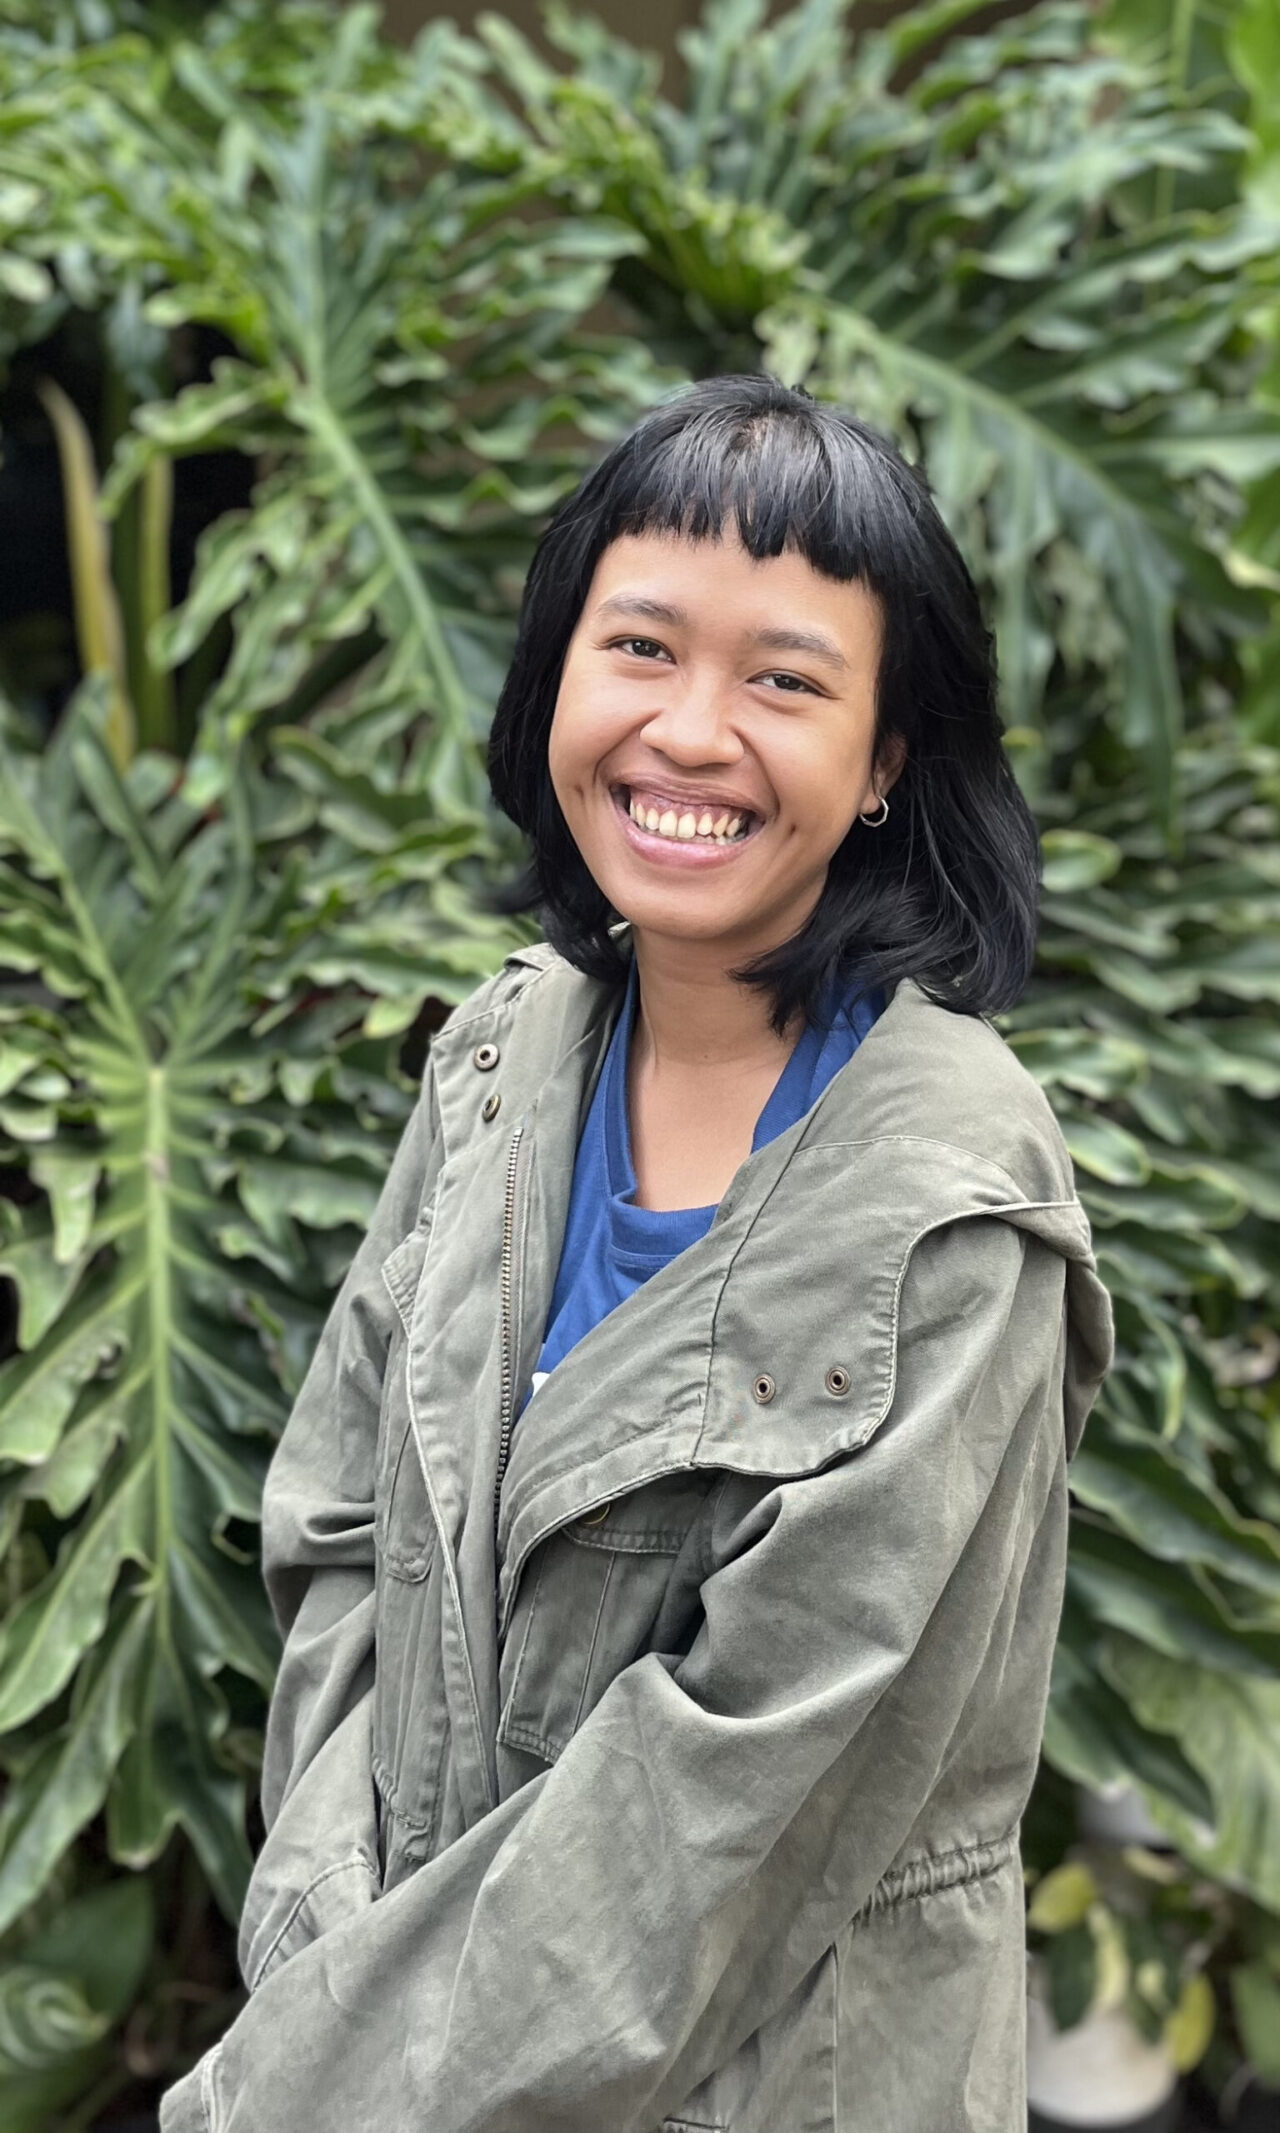 A Photo of the artist Syaura, an Indonesian woman with shoulder-length, straight, black hair. She smiles from cheek-to-cheek, baring her teeth. She stands in front of green tropical foliage.